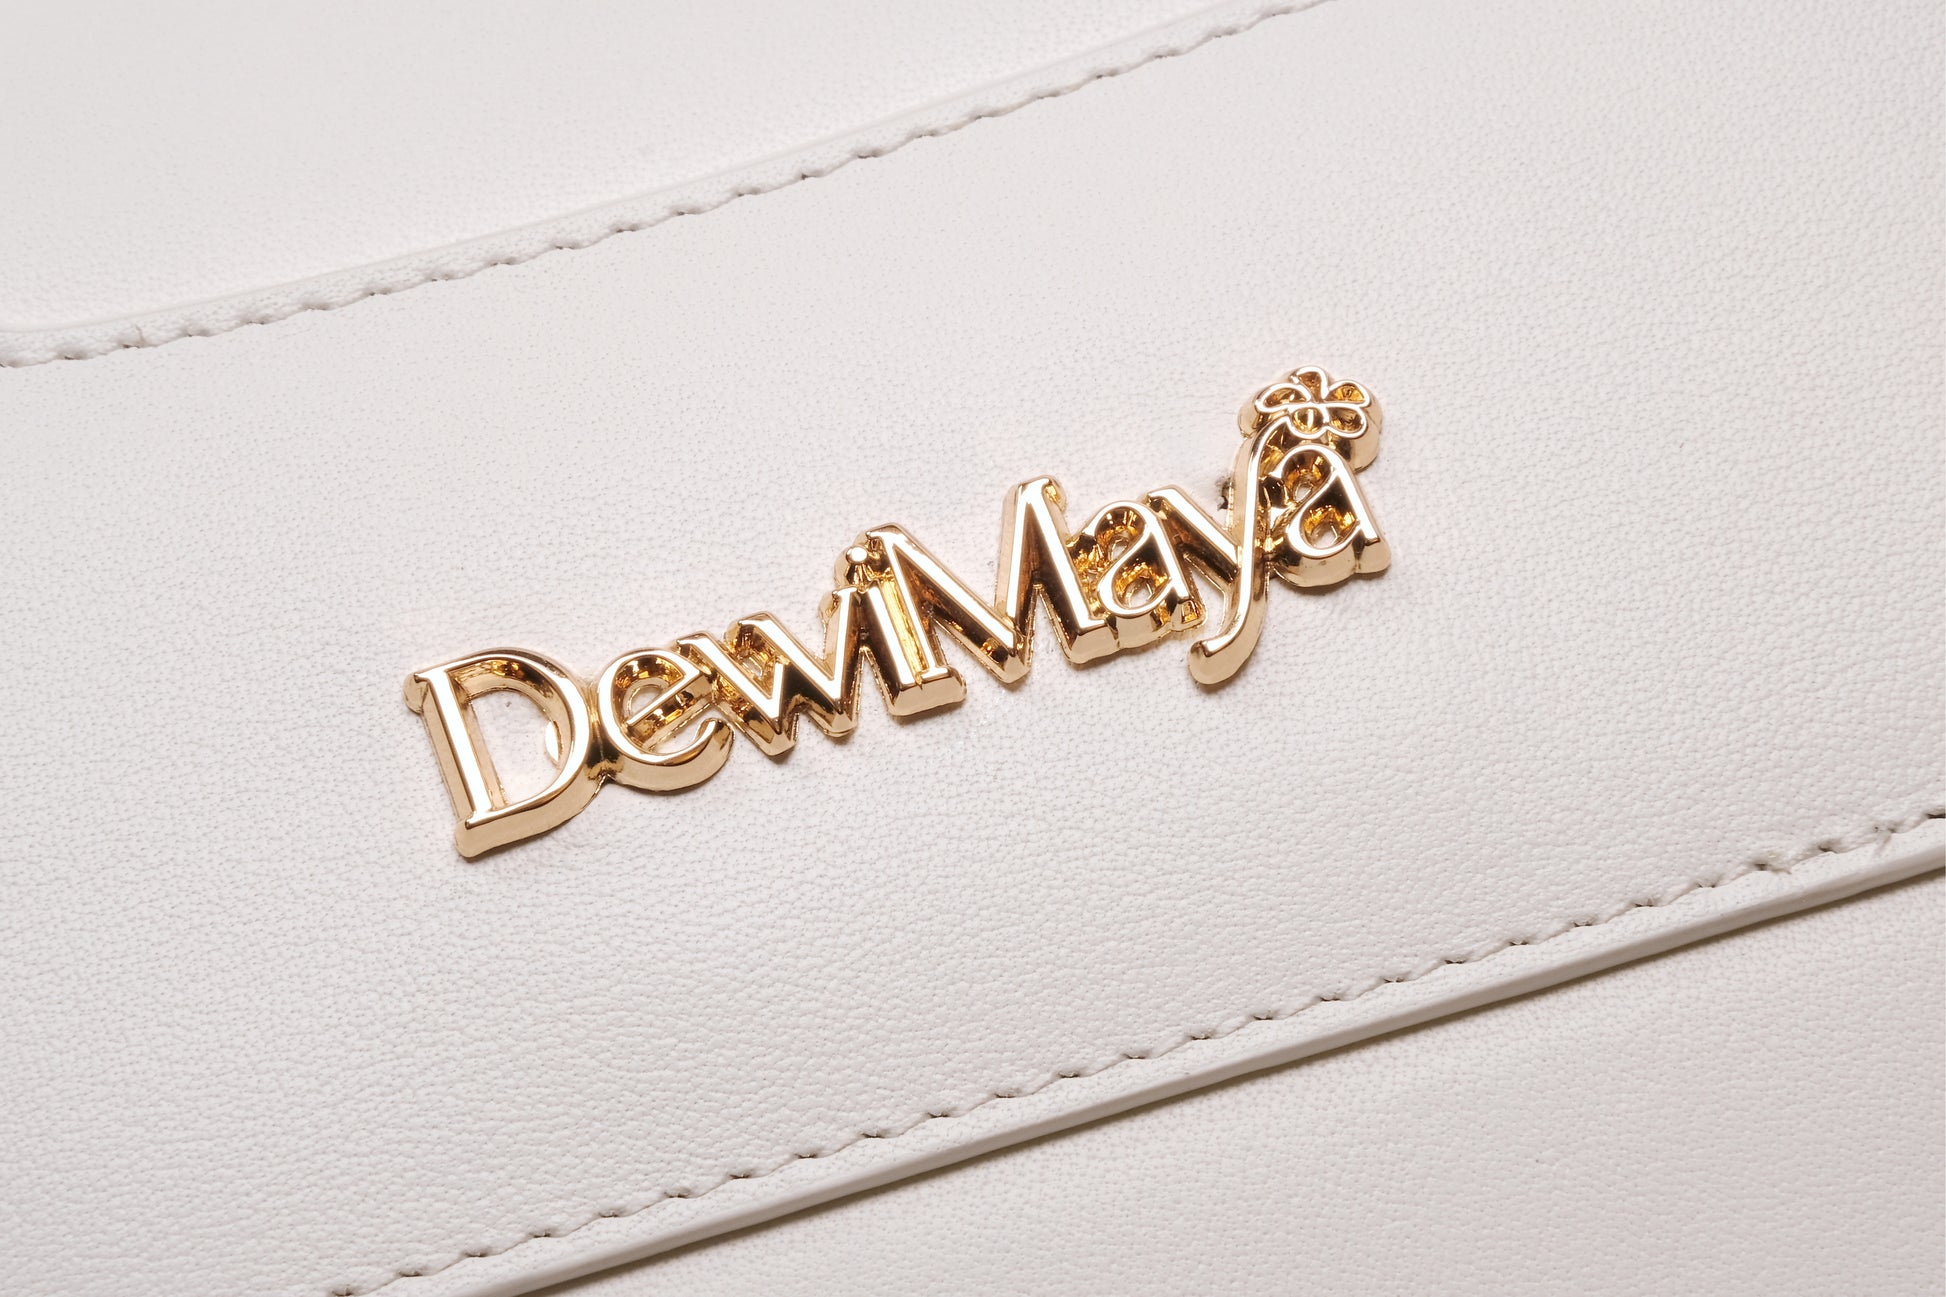 Jasmine White Leather Handbag Made by Dewi Maya gold logo available at the best boutique in Upstate South Carolina Spartanburg Greenville Dewi Maya Boutique